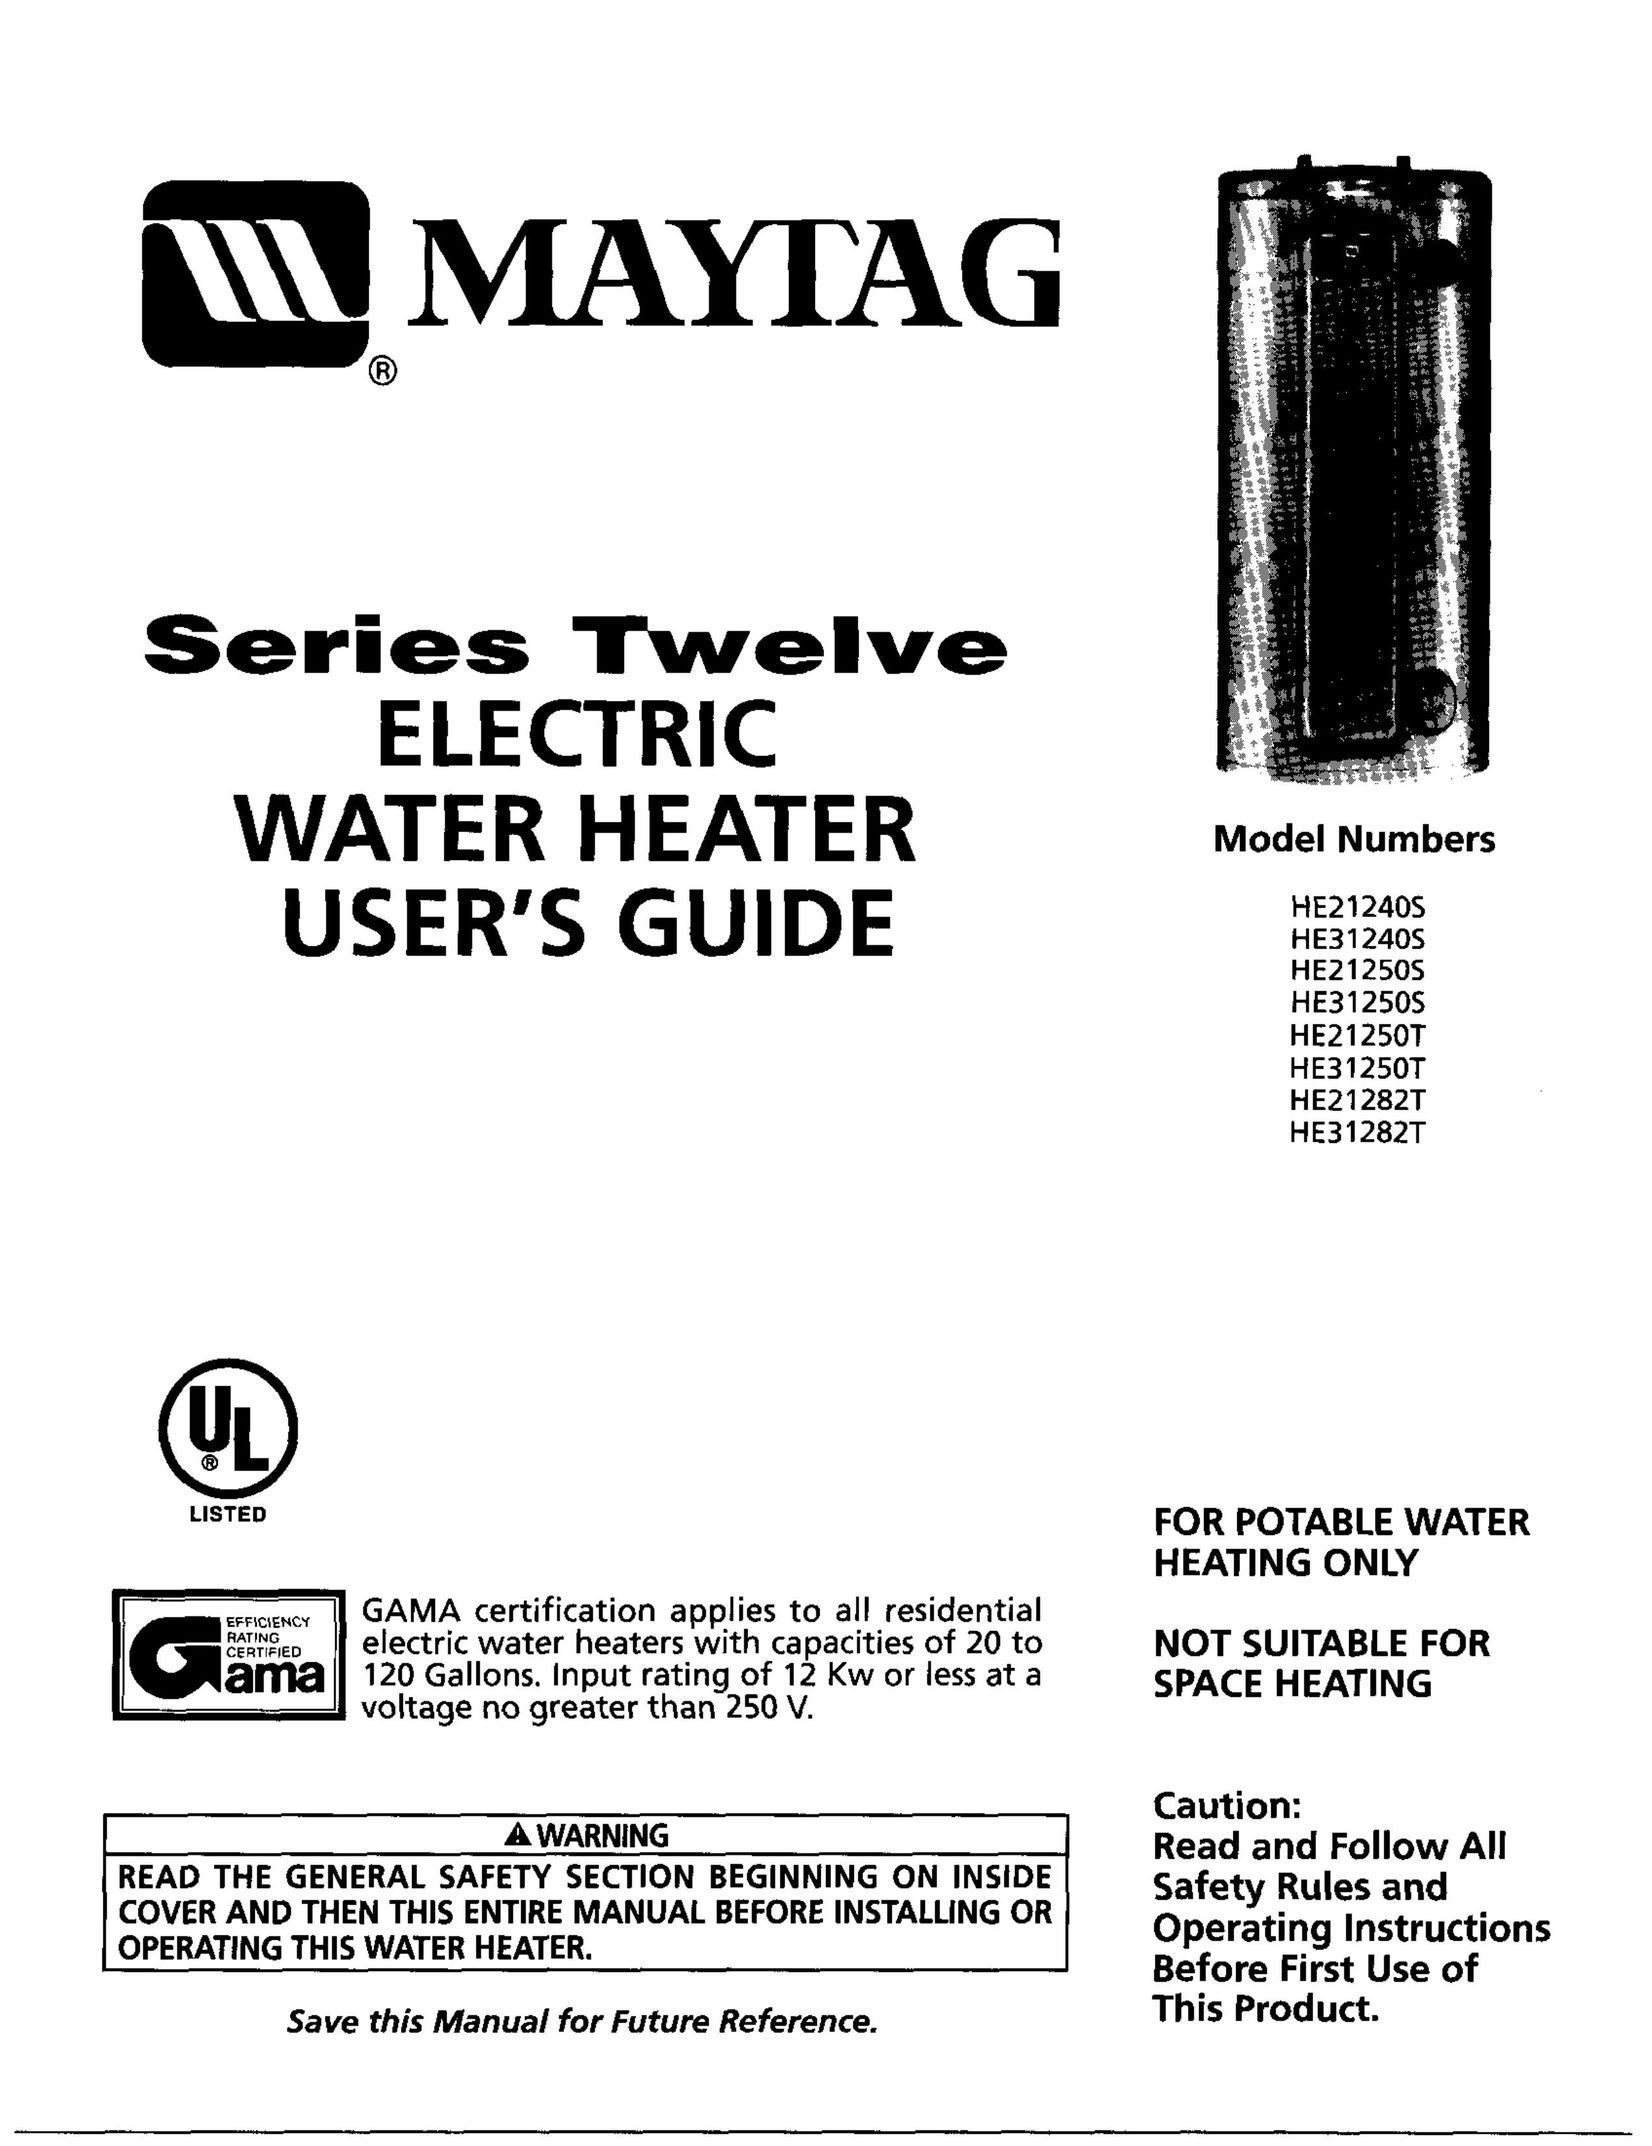 Maytag HE31282T Water Heater User Manual